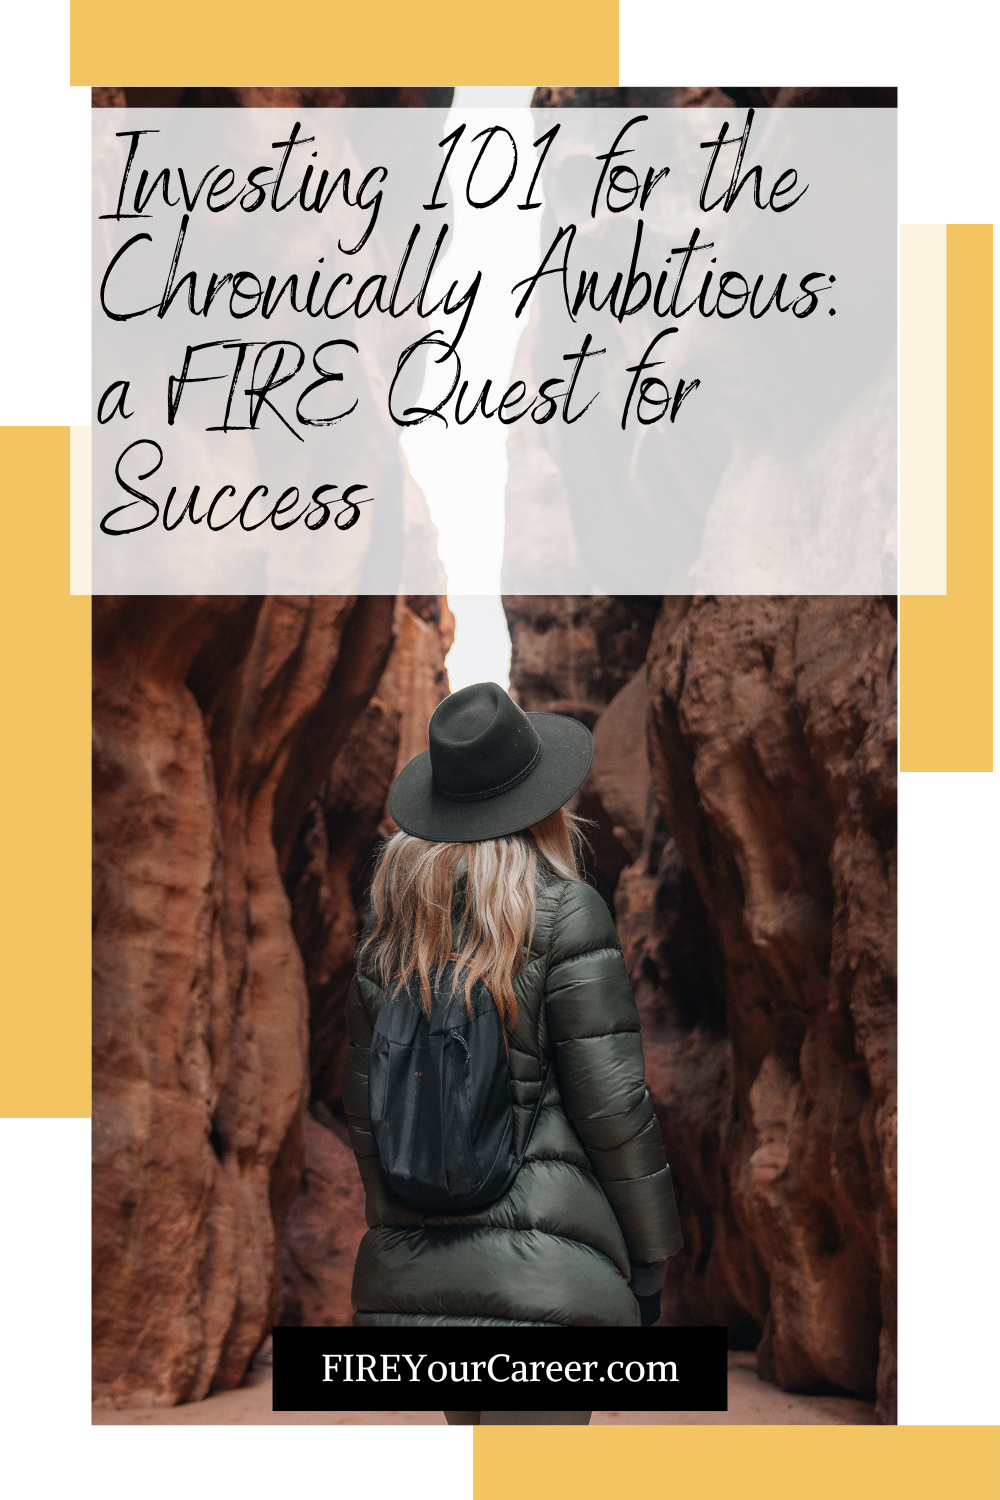 Investing 101 for the Chronically Ambitious a FIRE Quest for Success Pinterest